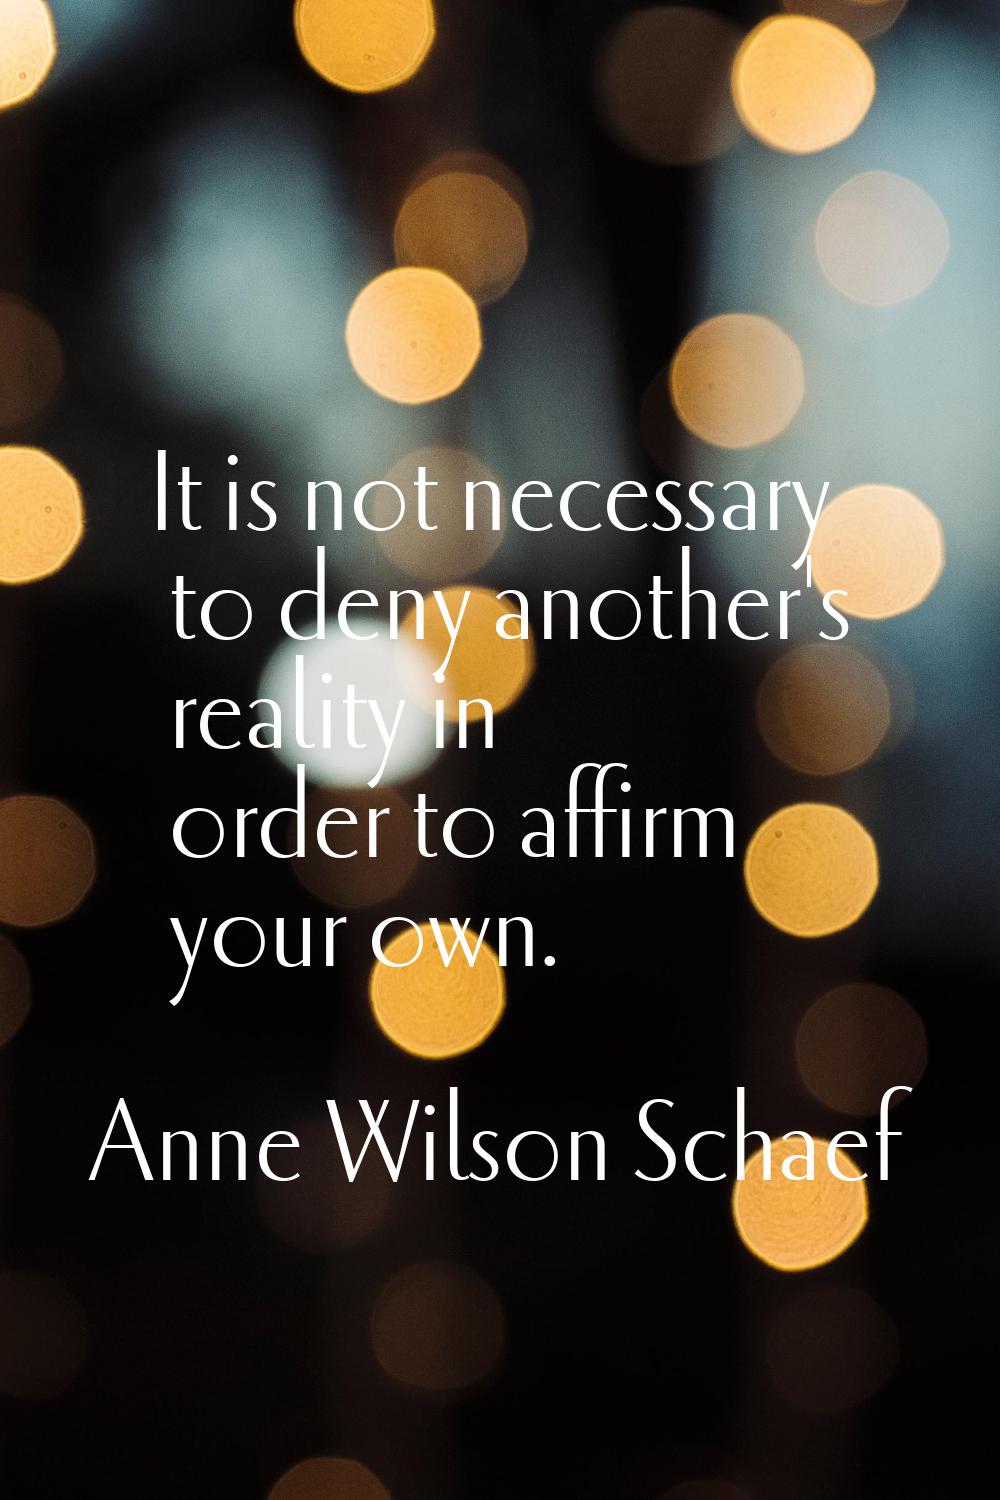 It is not necessary to deny another's reality in order to affirm your own.